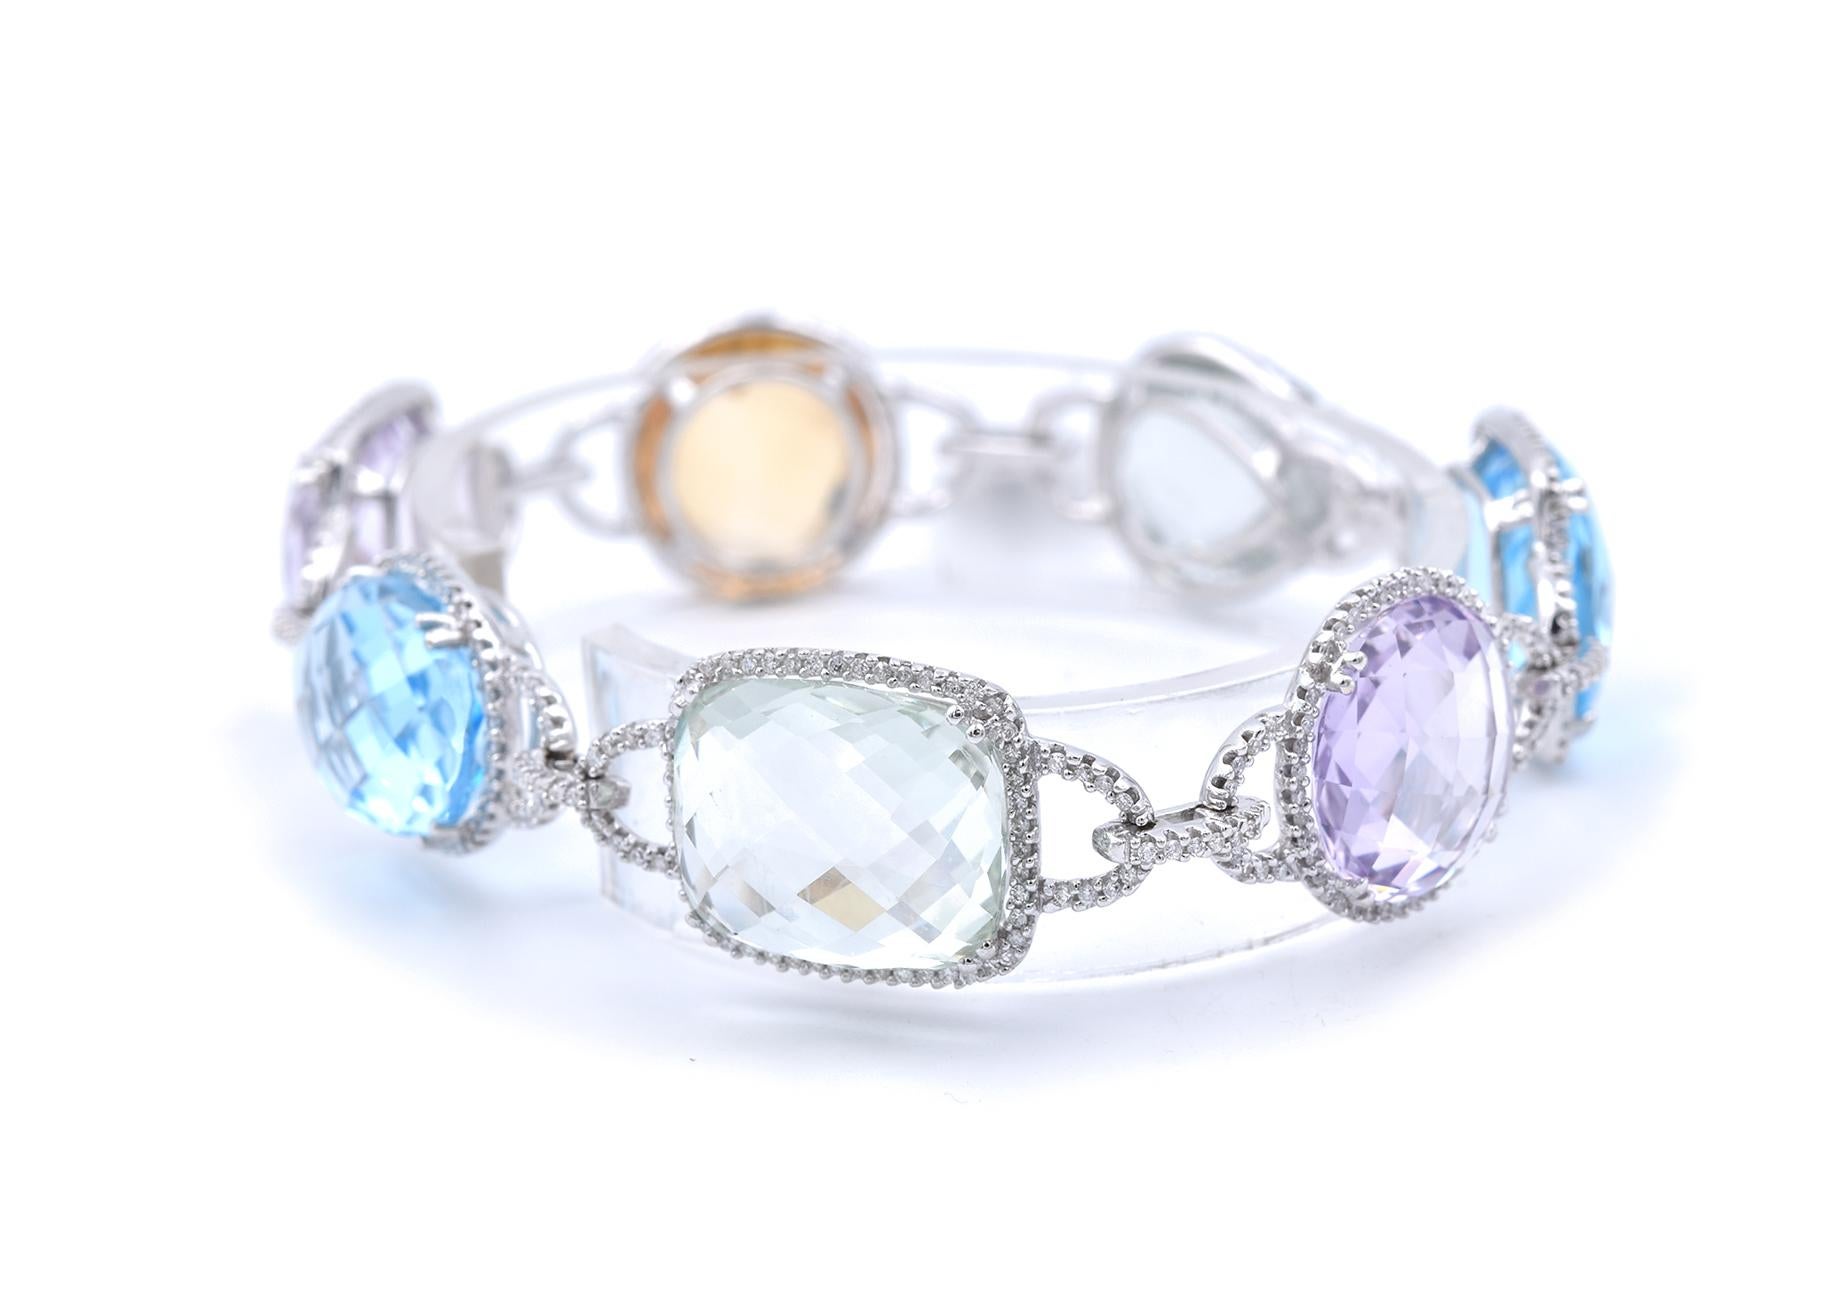 Designer: custom design
Material: 14k white gold
Gemstone: Amethyst, prasiolite, blue topaz, and citrine
Diamonds: 2.50cttw
Color: G
Clarity: SI1
Dimensions: bracelet will fit up to an 8-inch wrist and 16.60mm in width
Weight: 30.36 grams
